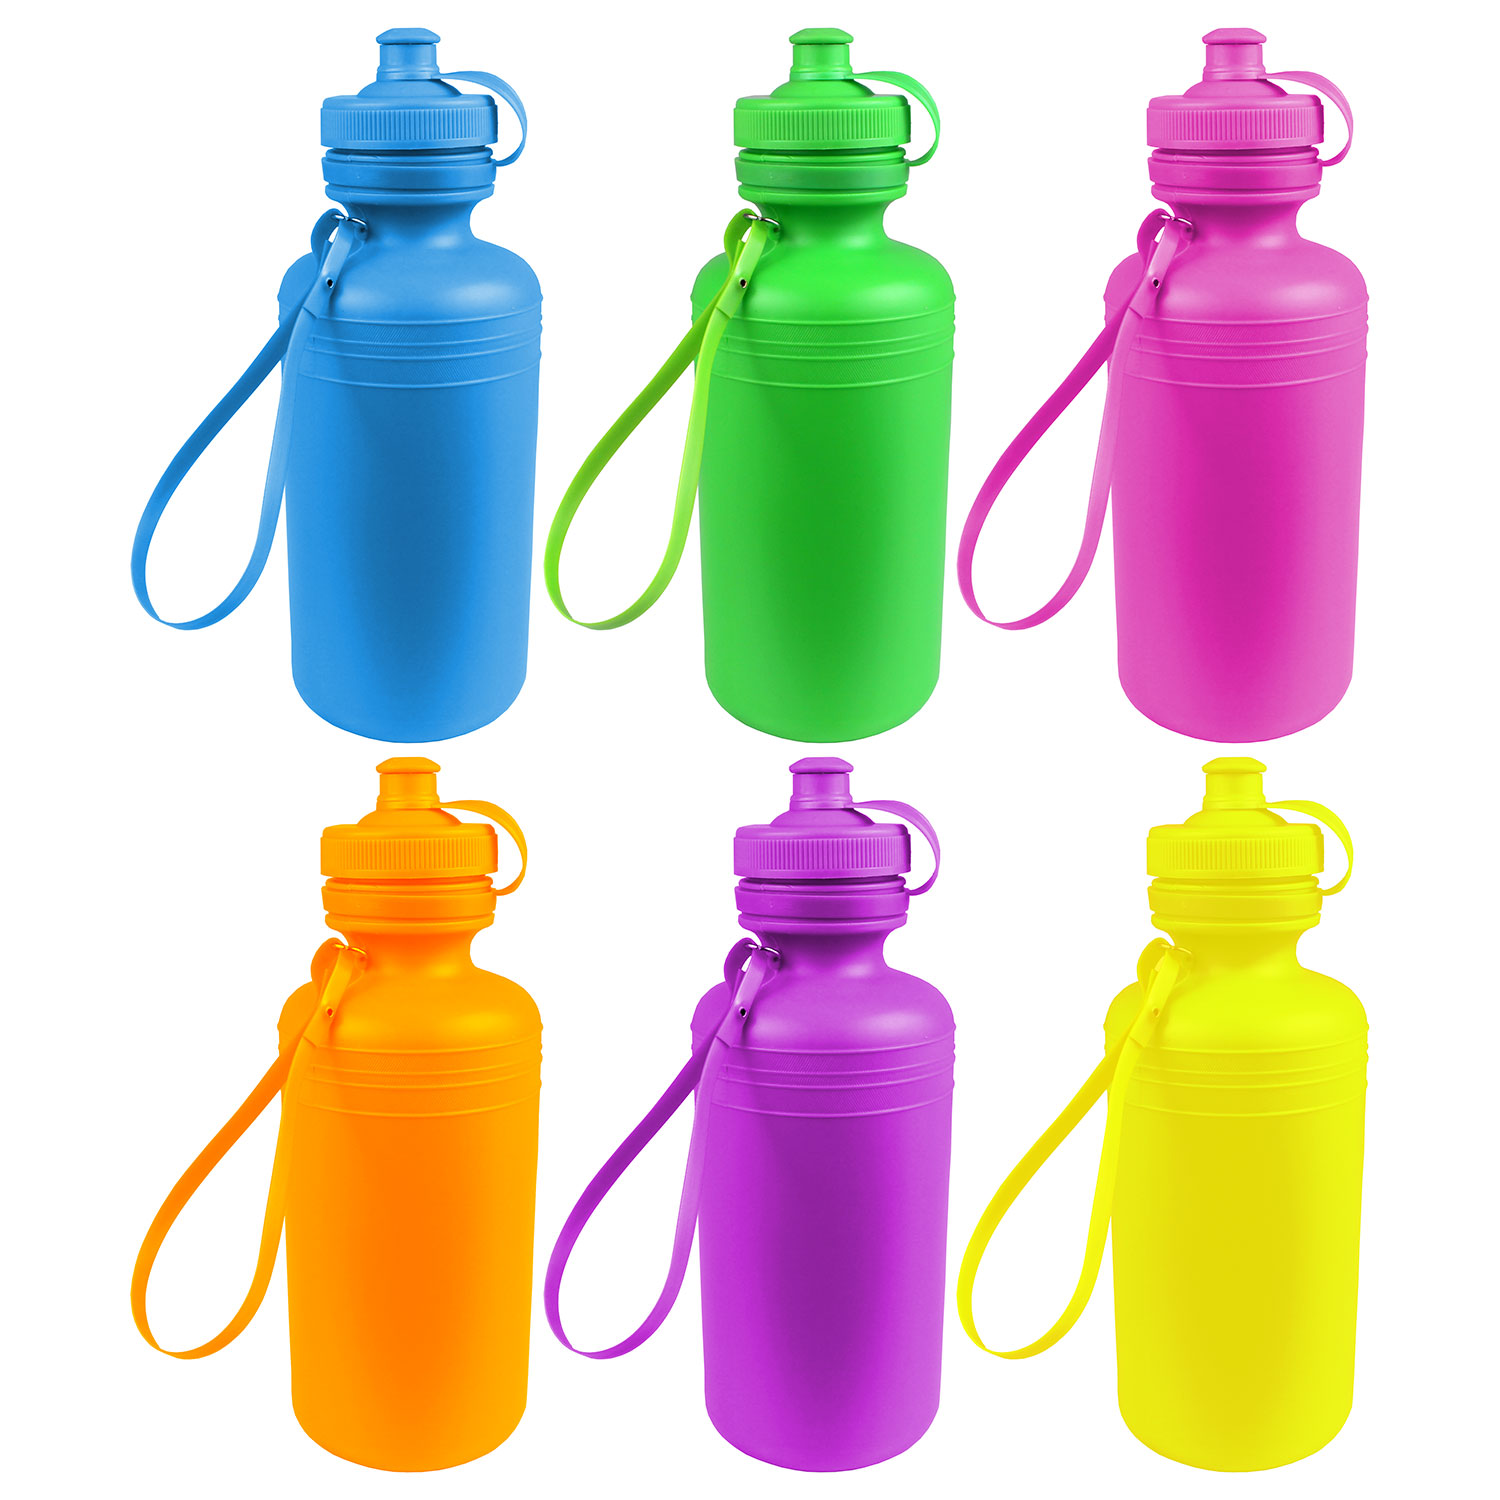 12 Kids Water Bottles Bulk Pack, Summer Beach Accessory | Holds 18 Ounces,  6 Different Neon Colors With Wrist Strap (12 Pack)